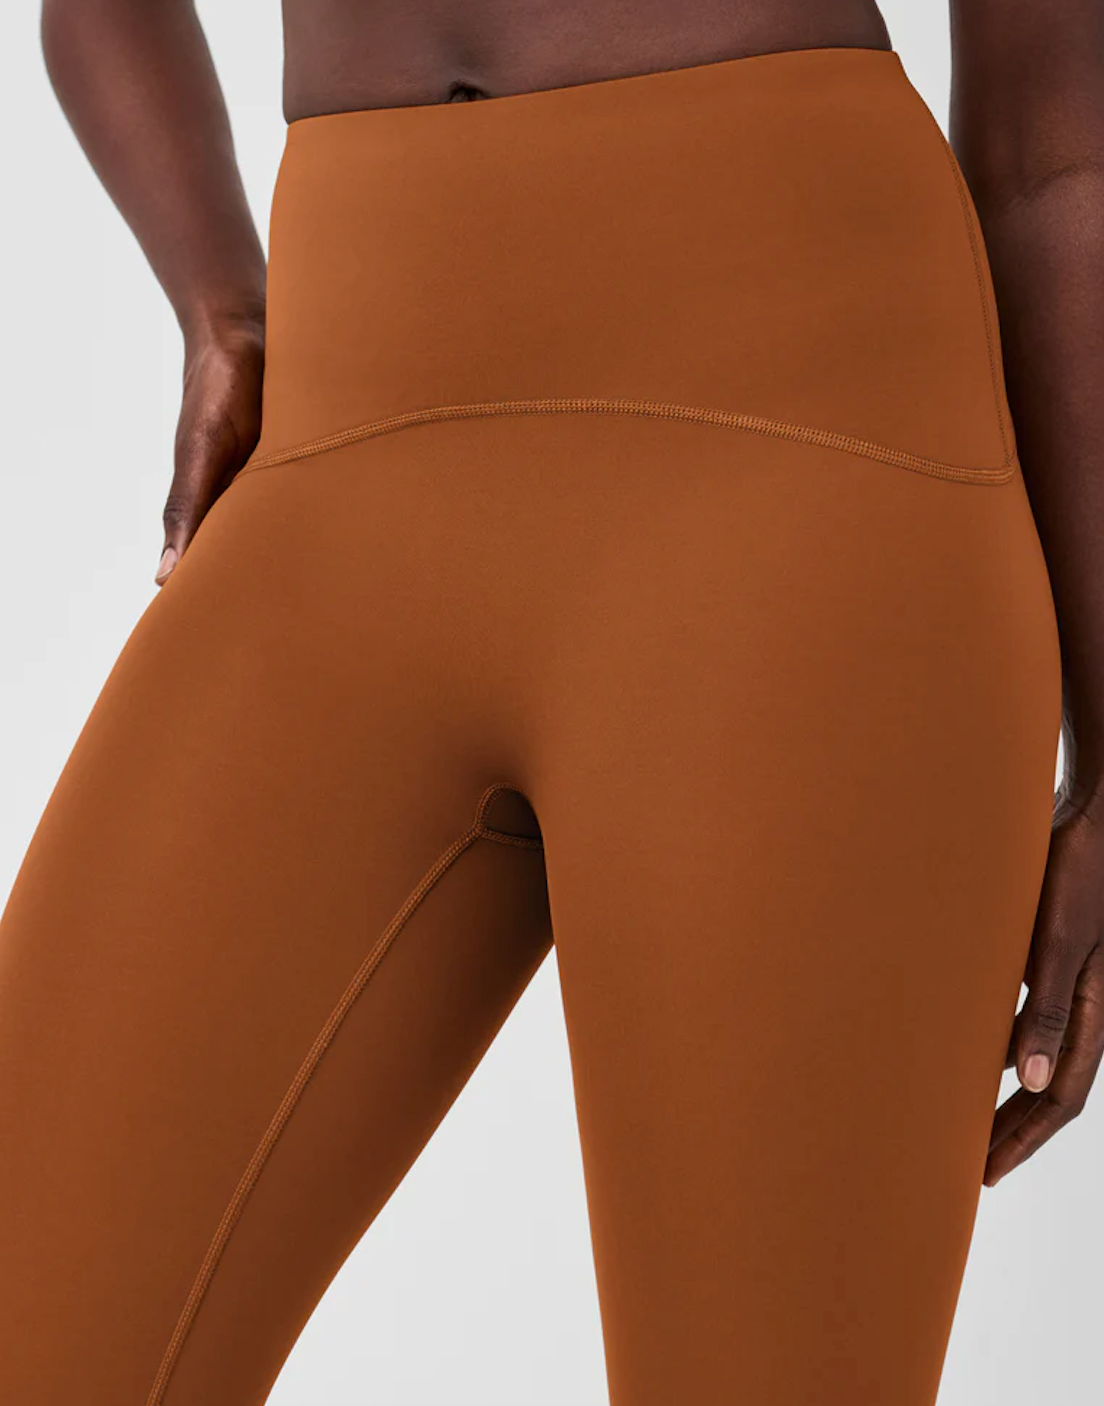 SPANX - NEW! NEW! NEW! Our Booty Boost Active Collection just got